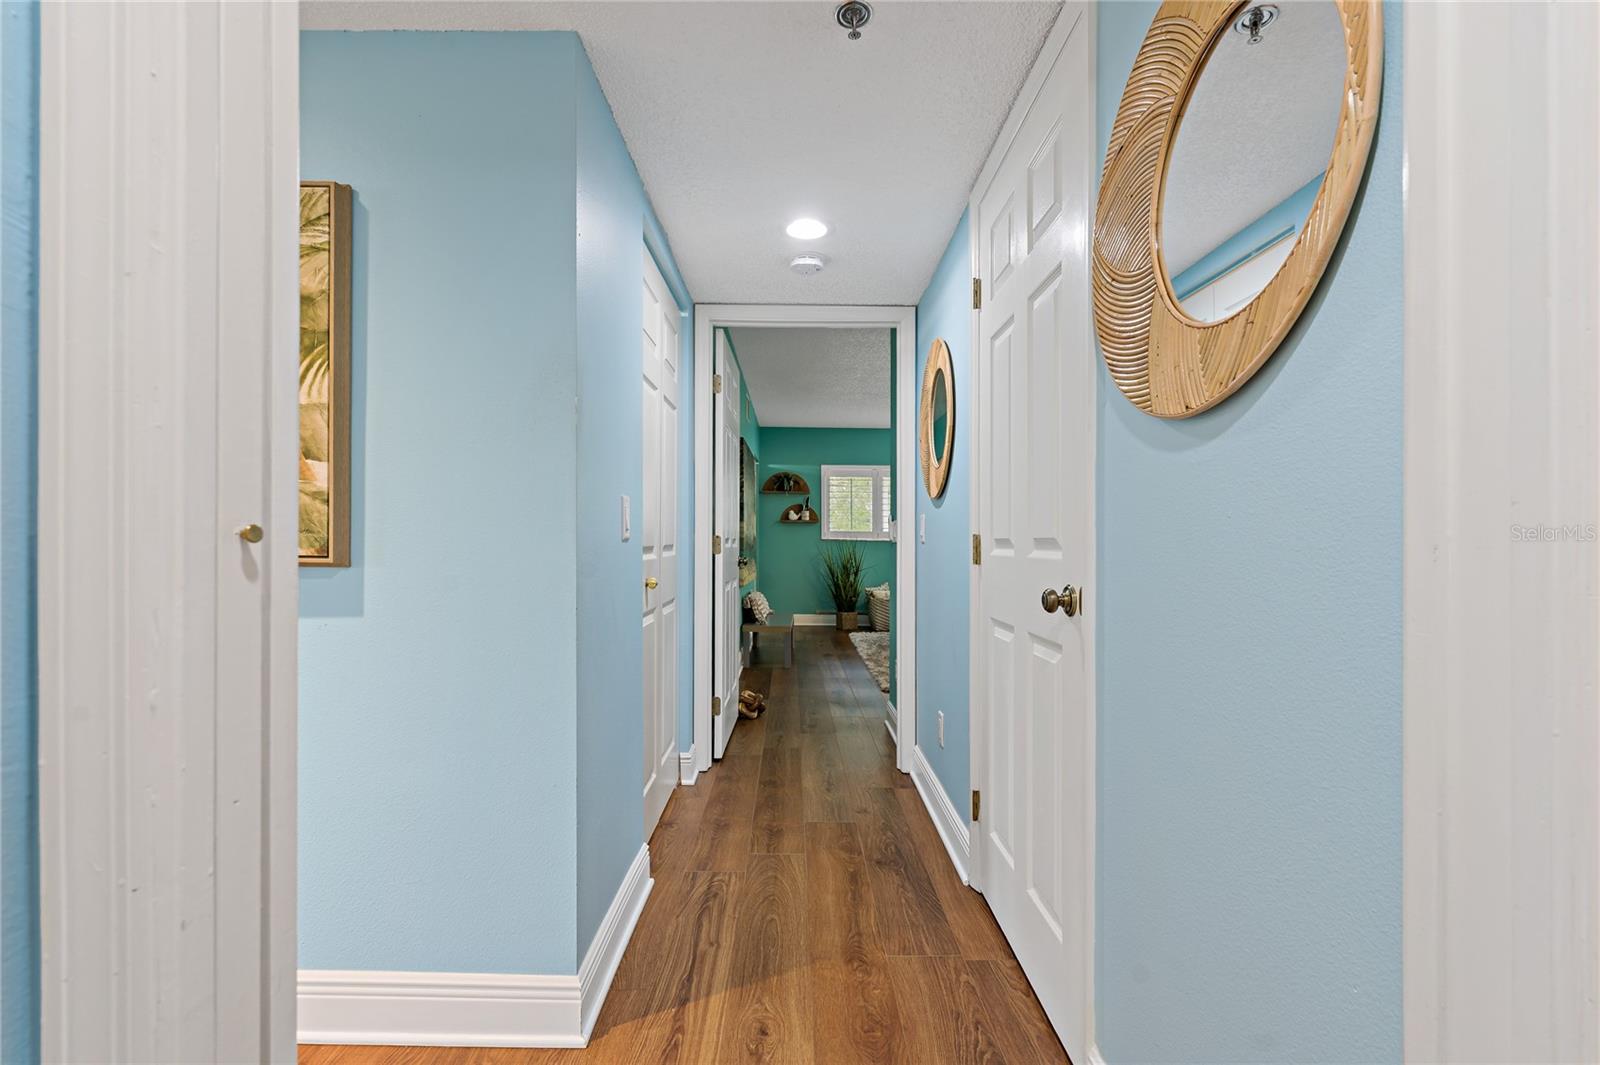 HALL LEADING TO YOUR PRIMARY SUITE!